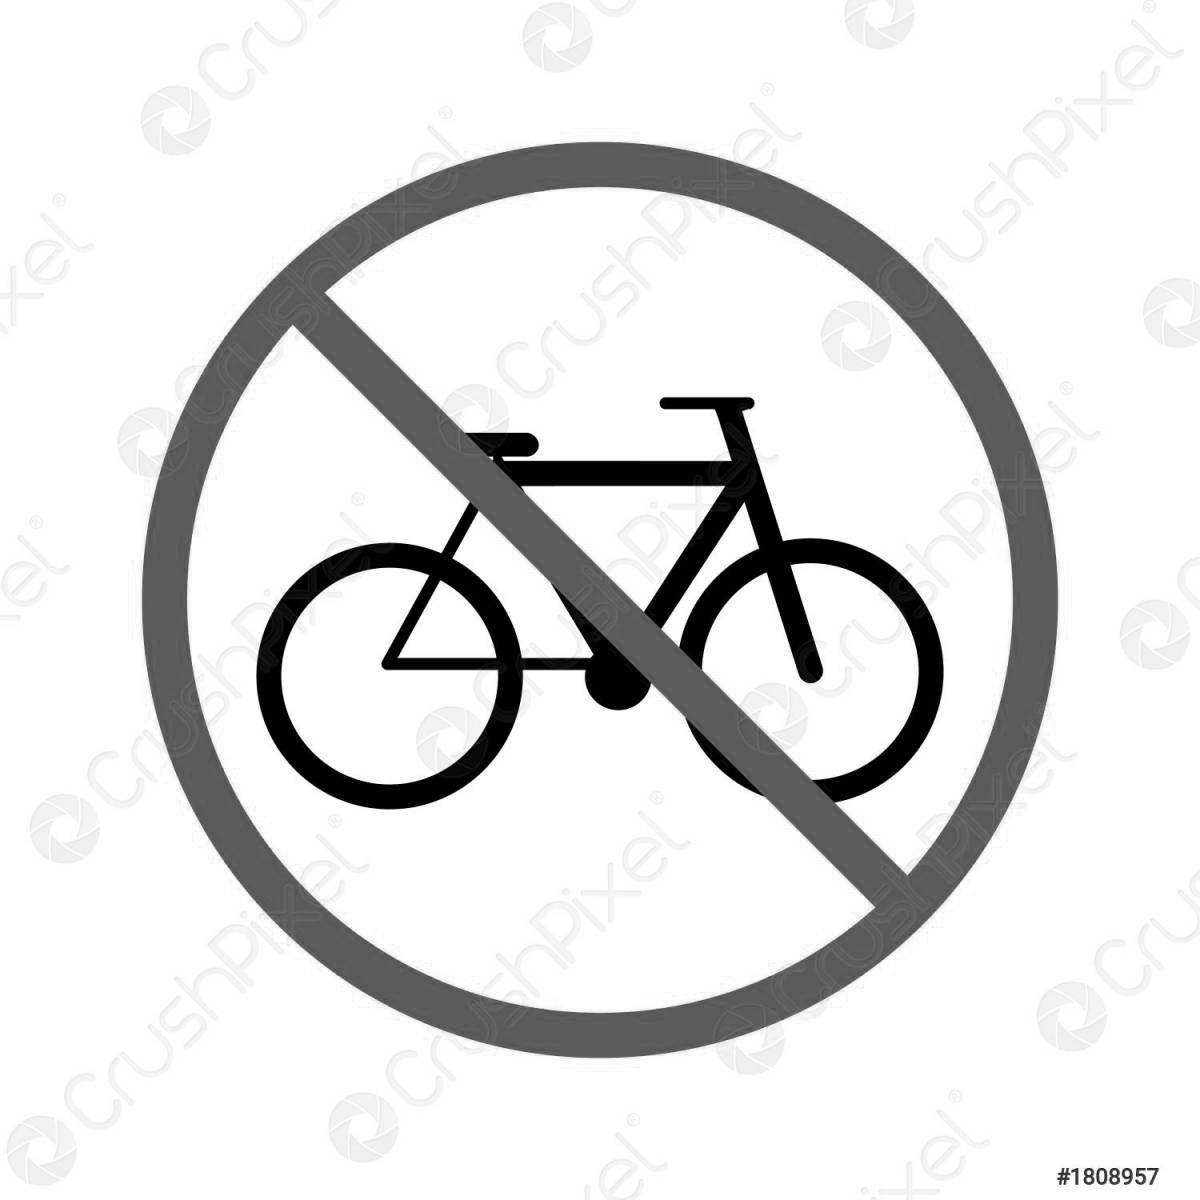 Coloring page no bicycles magnetic sign